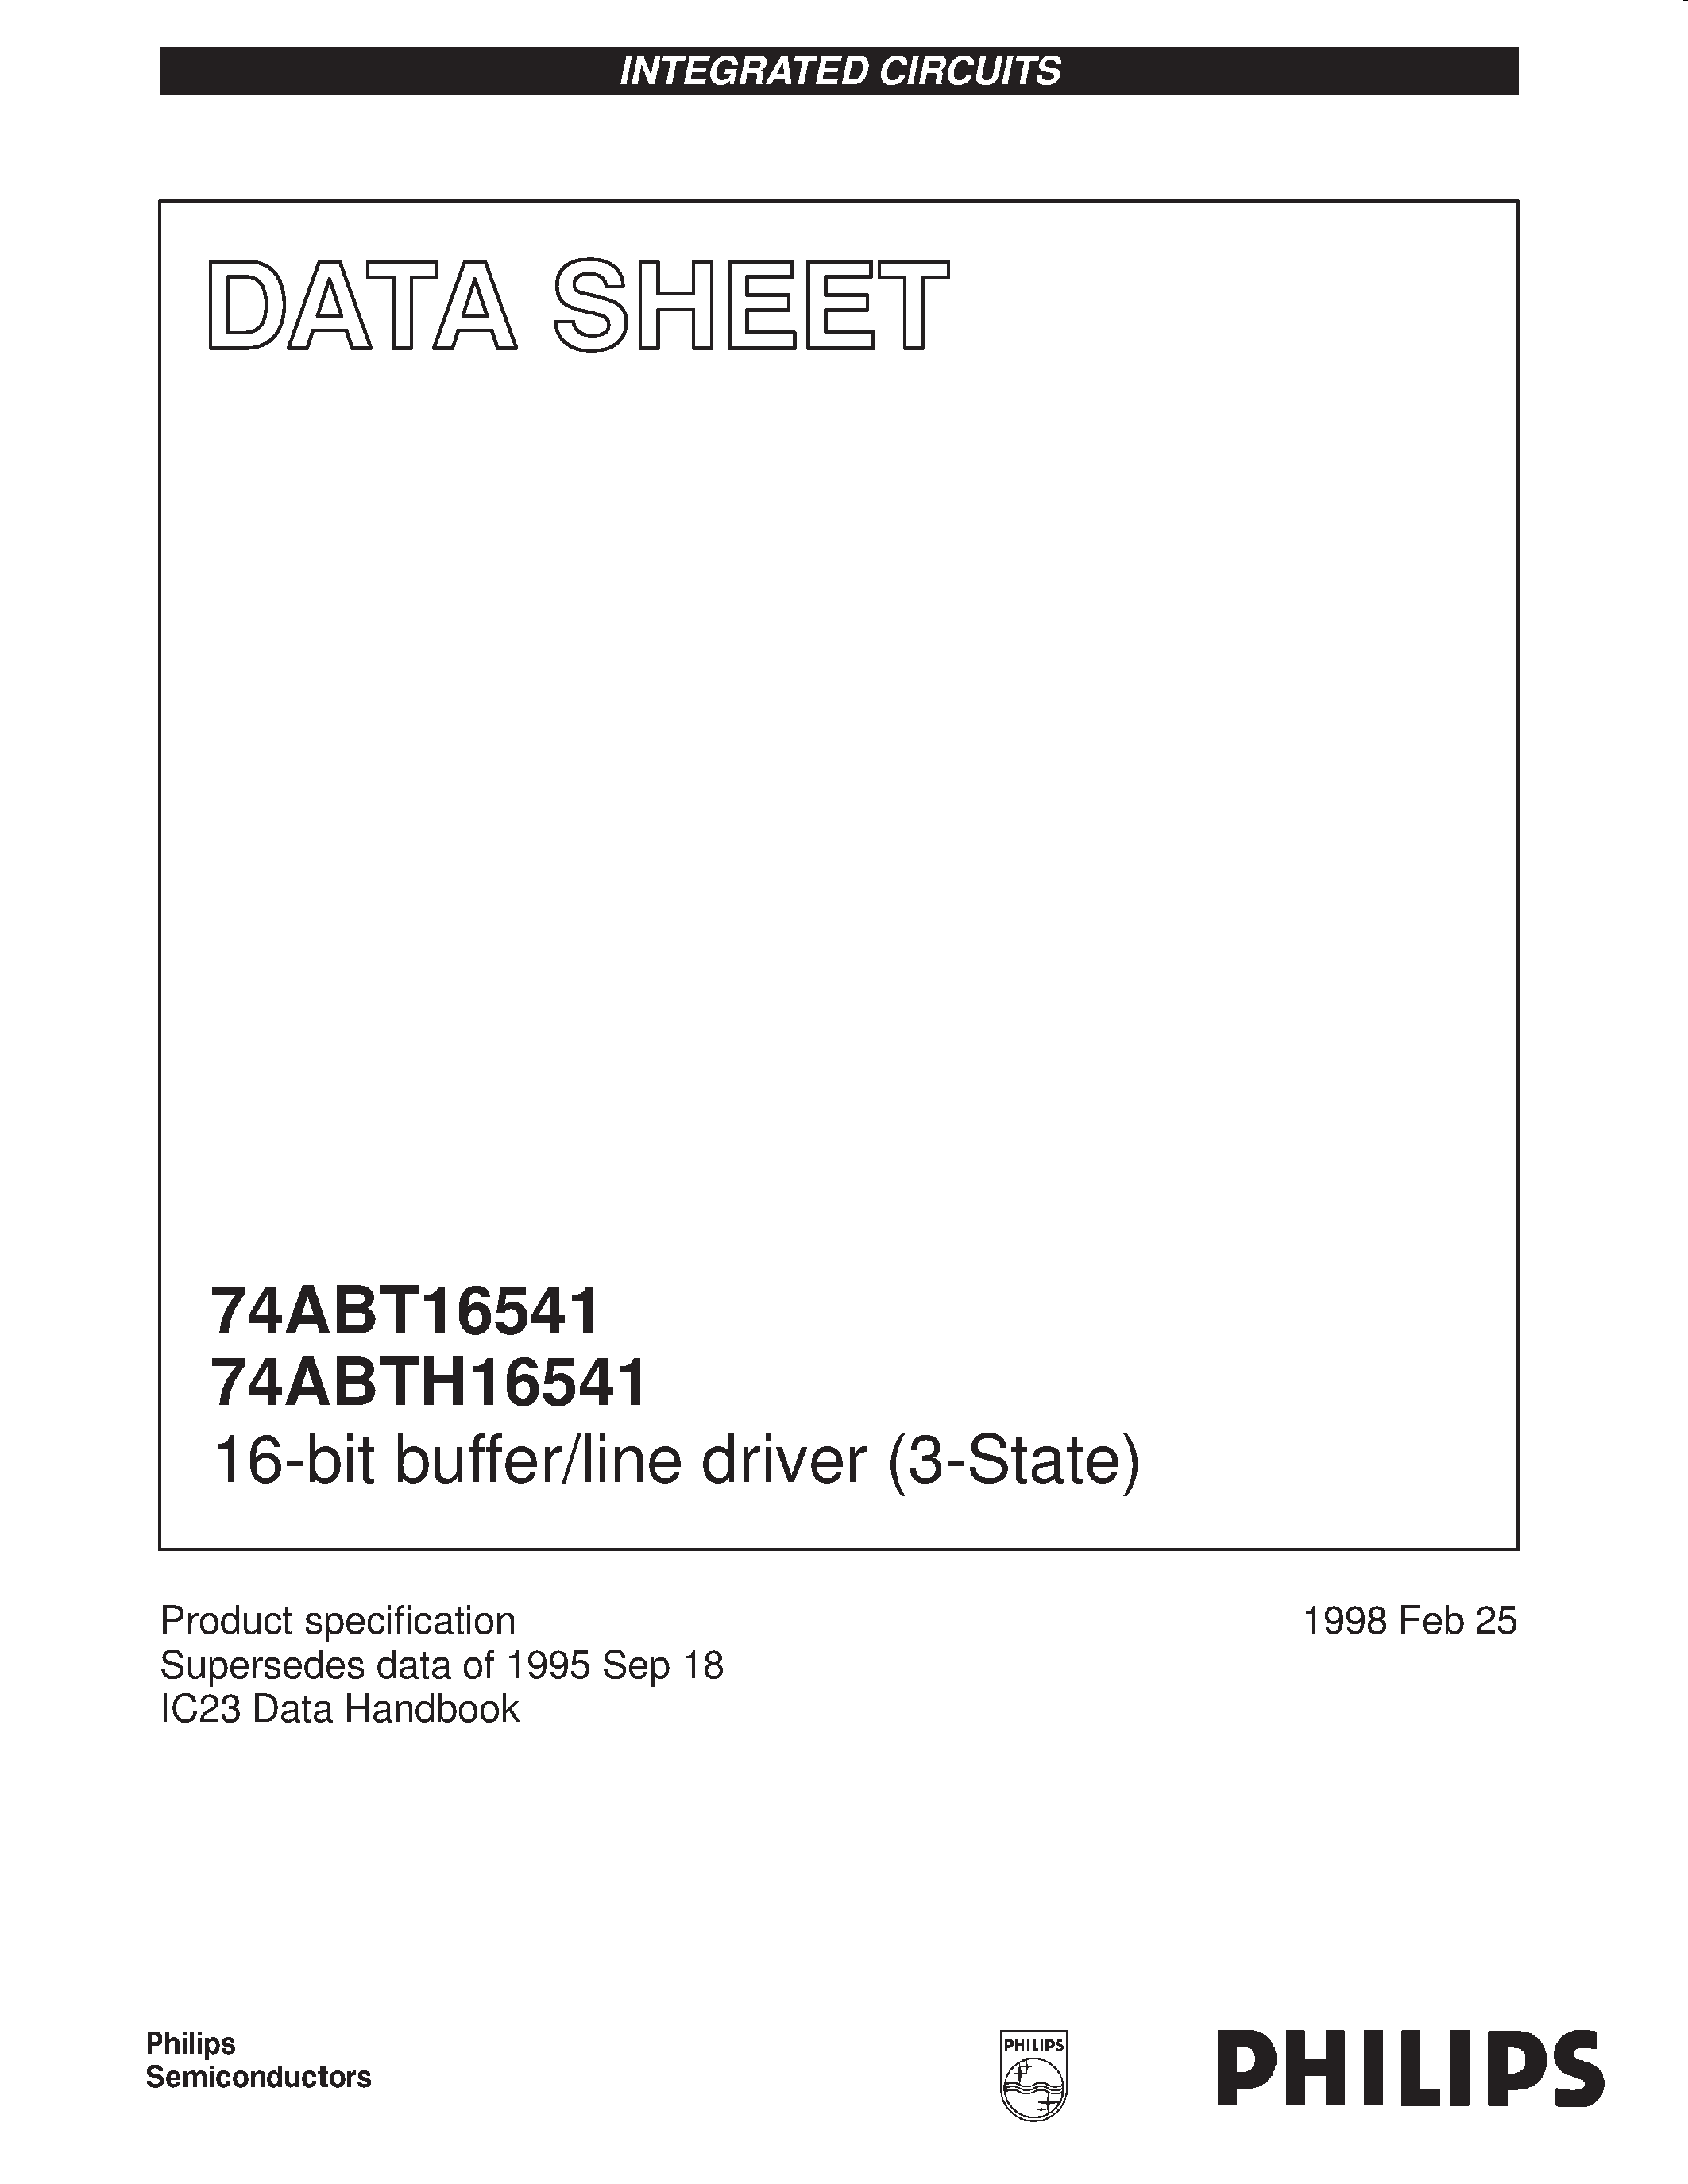 Datasheet 74ABTH16541DGG - 16-bit buffer/line driver 3-State page 1